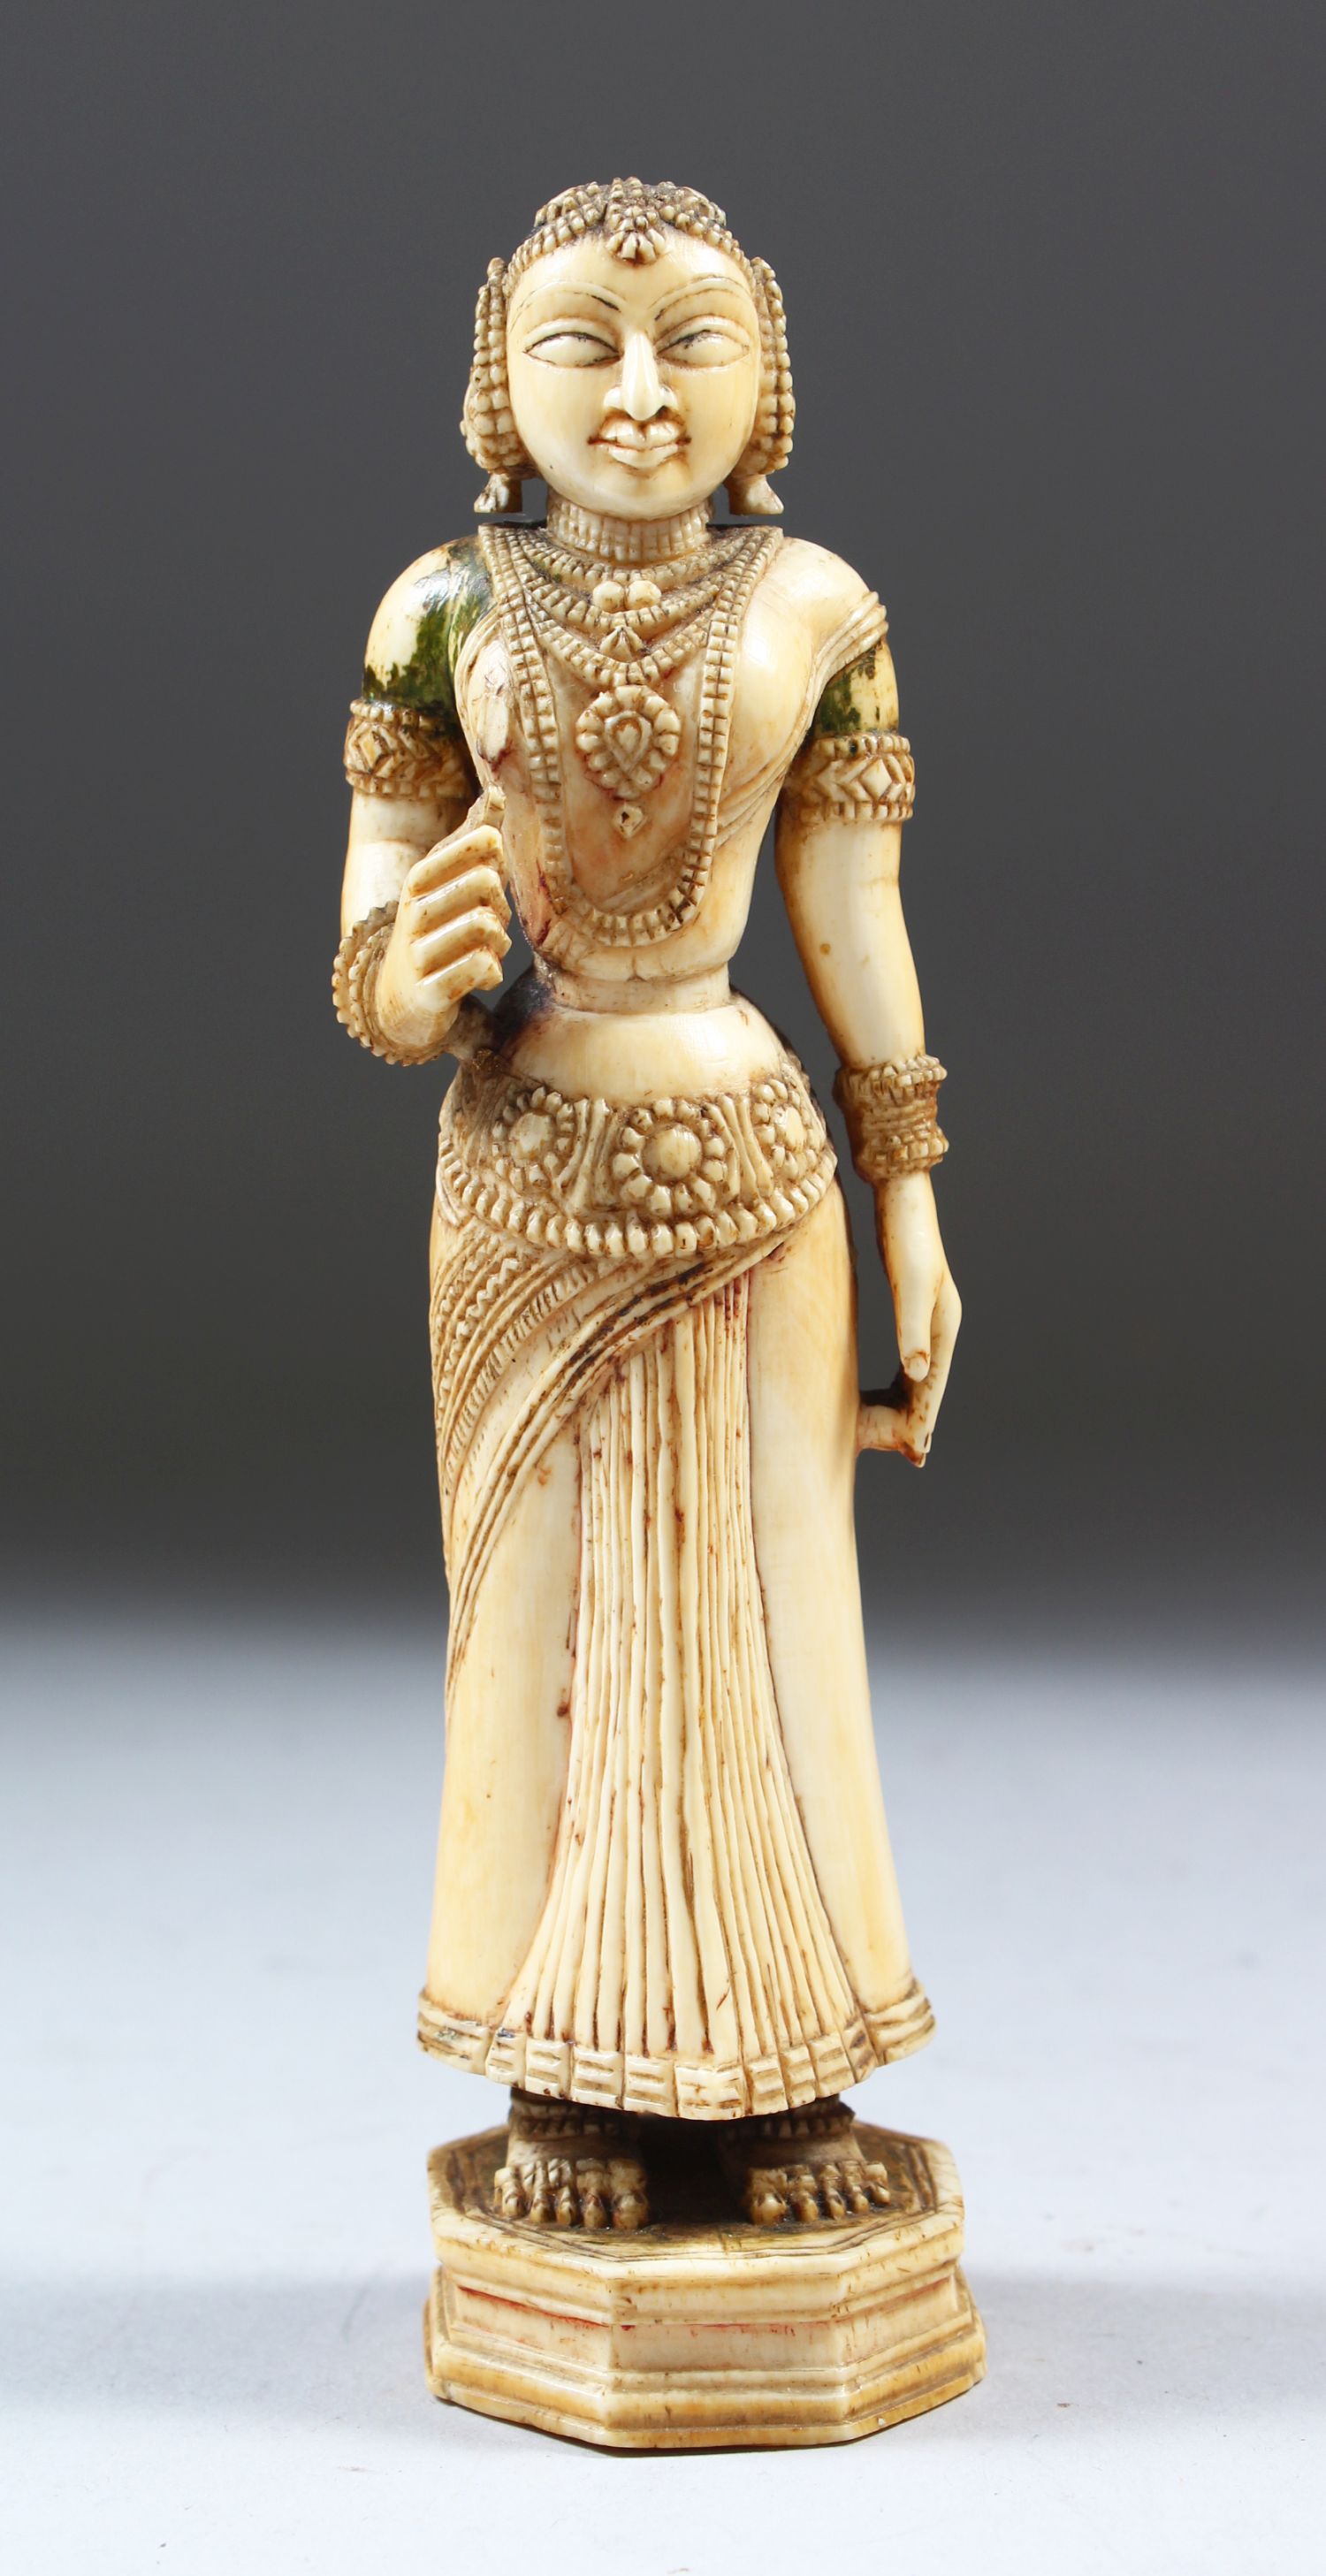 A 17TH-18TH CENTURY INDIAN POLYCHROME CARVED IVORY FIGURE of a young lady standing on an octagonal